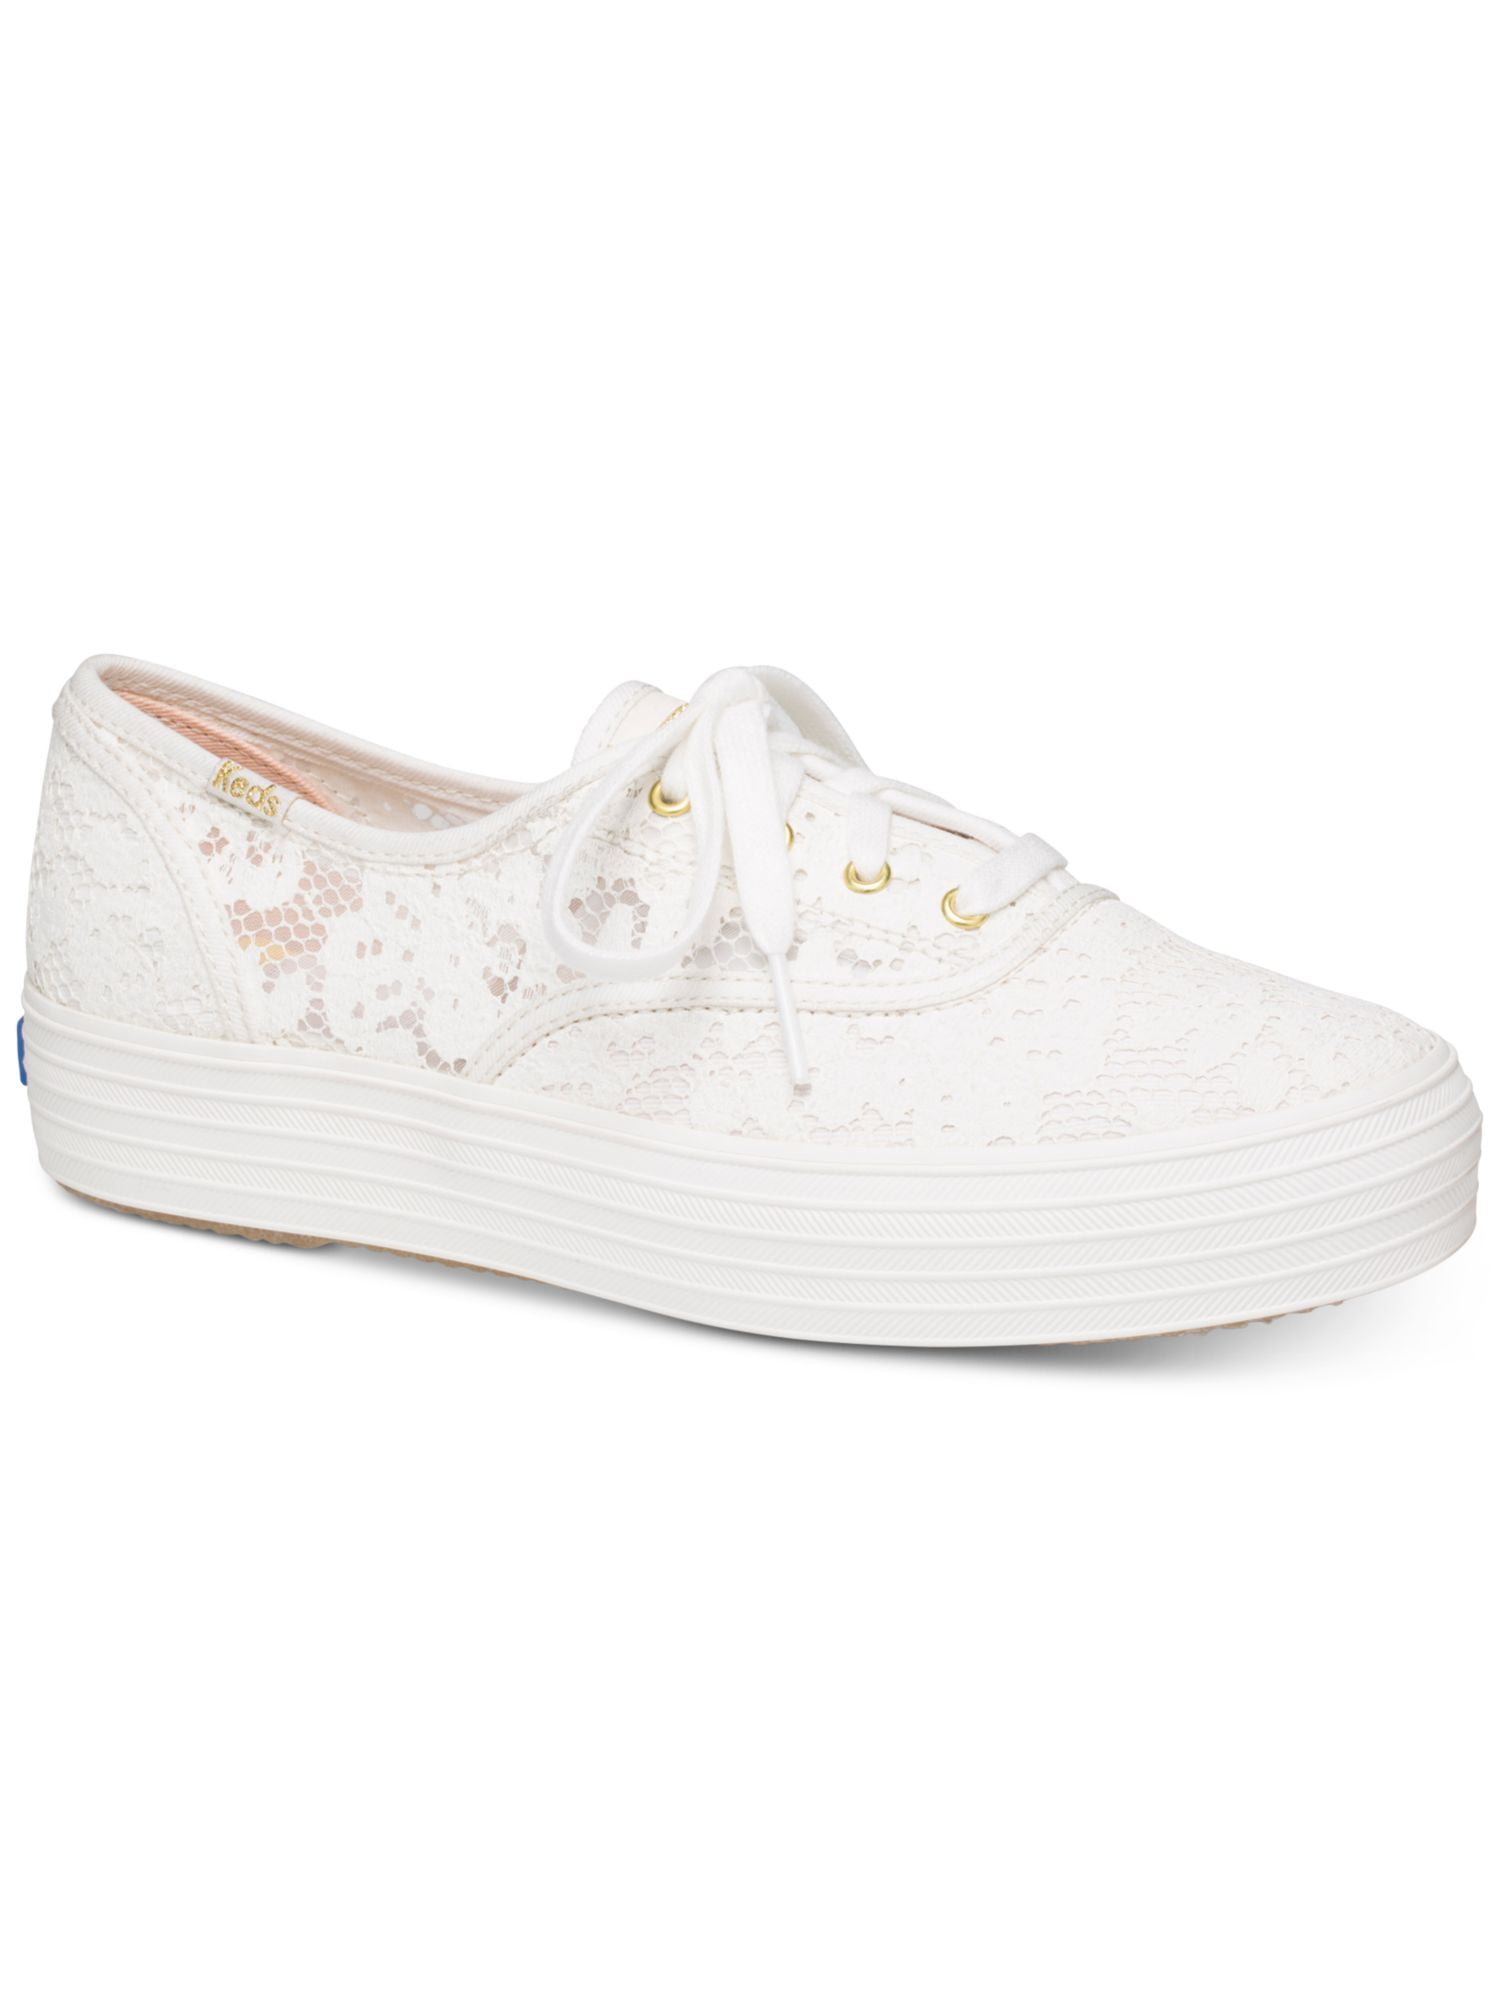 KEDS Womens Ivory Crochet Sporty Cushioned Comfort Triple Painted Round ...